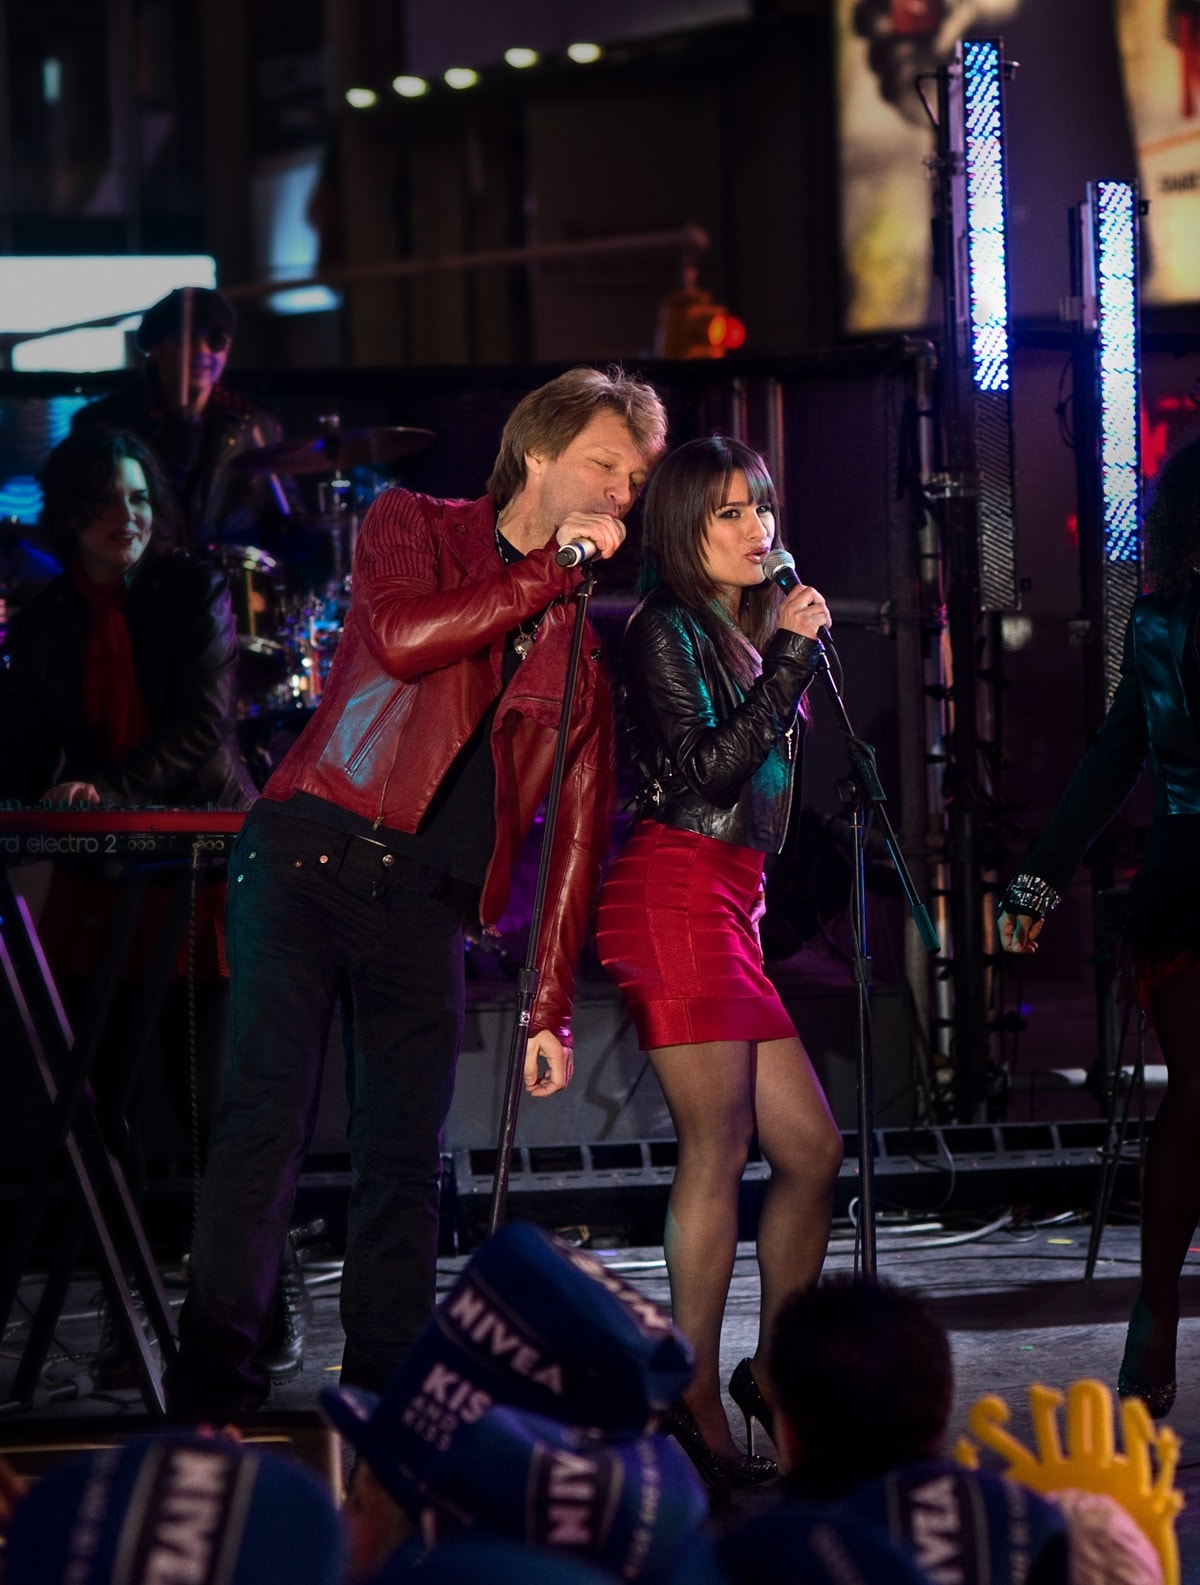 Lea Michele as Elise and Jon Bon Jovi as Daniel Jensen sing together in the 2011 American romantic comedy-drama film New Year's Eve